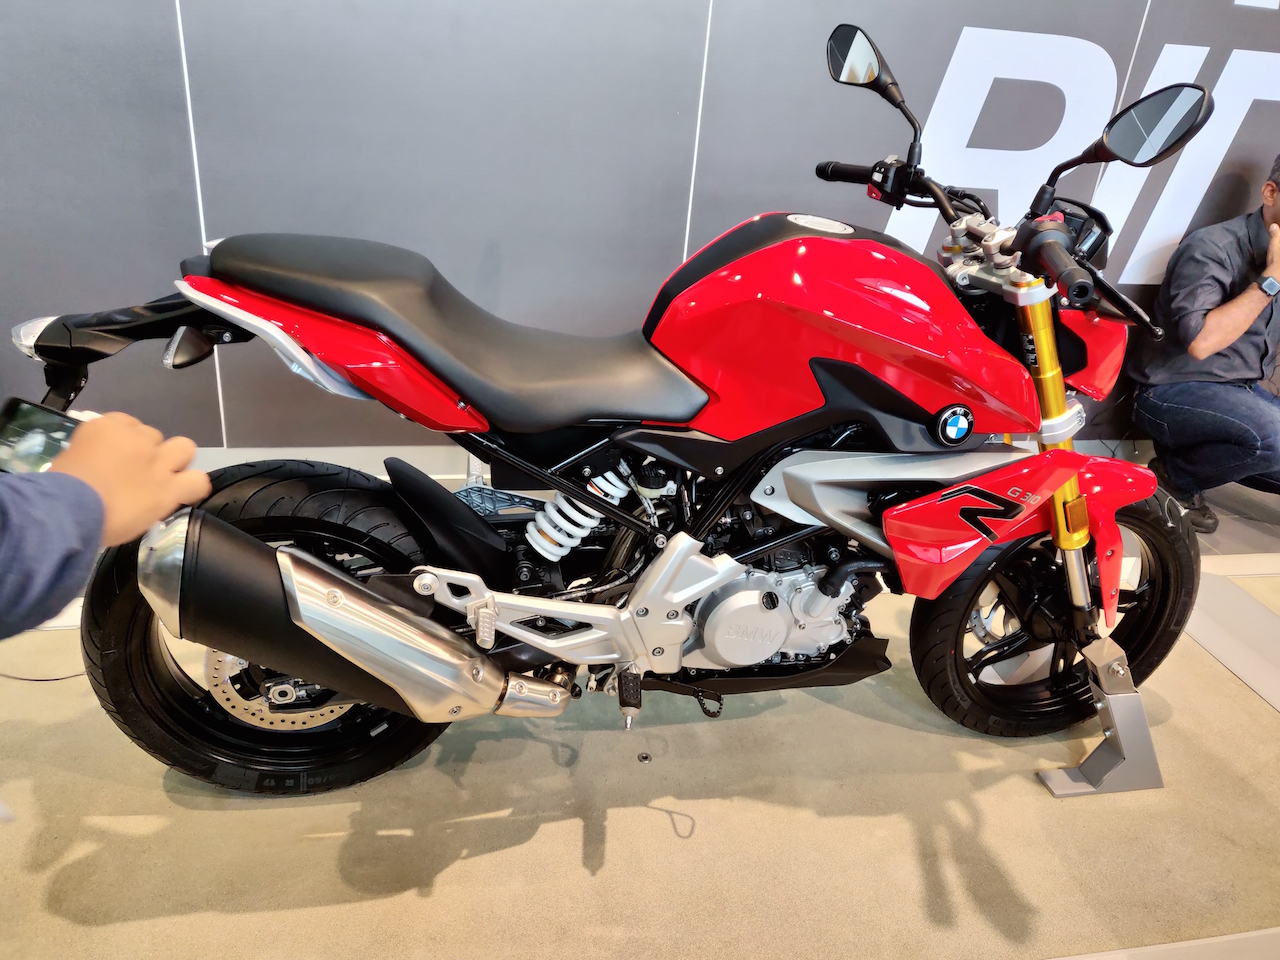 BMW G 310 R launched in India, priced at INR 2.99 lakh